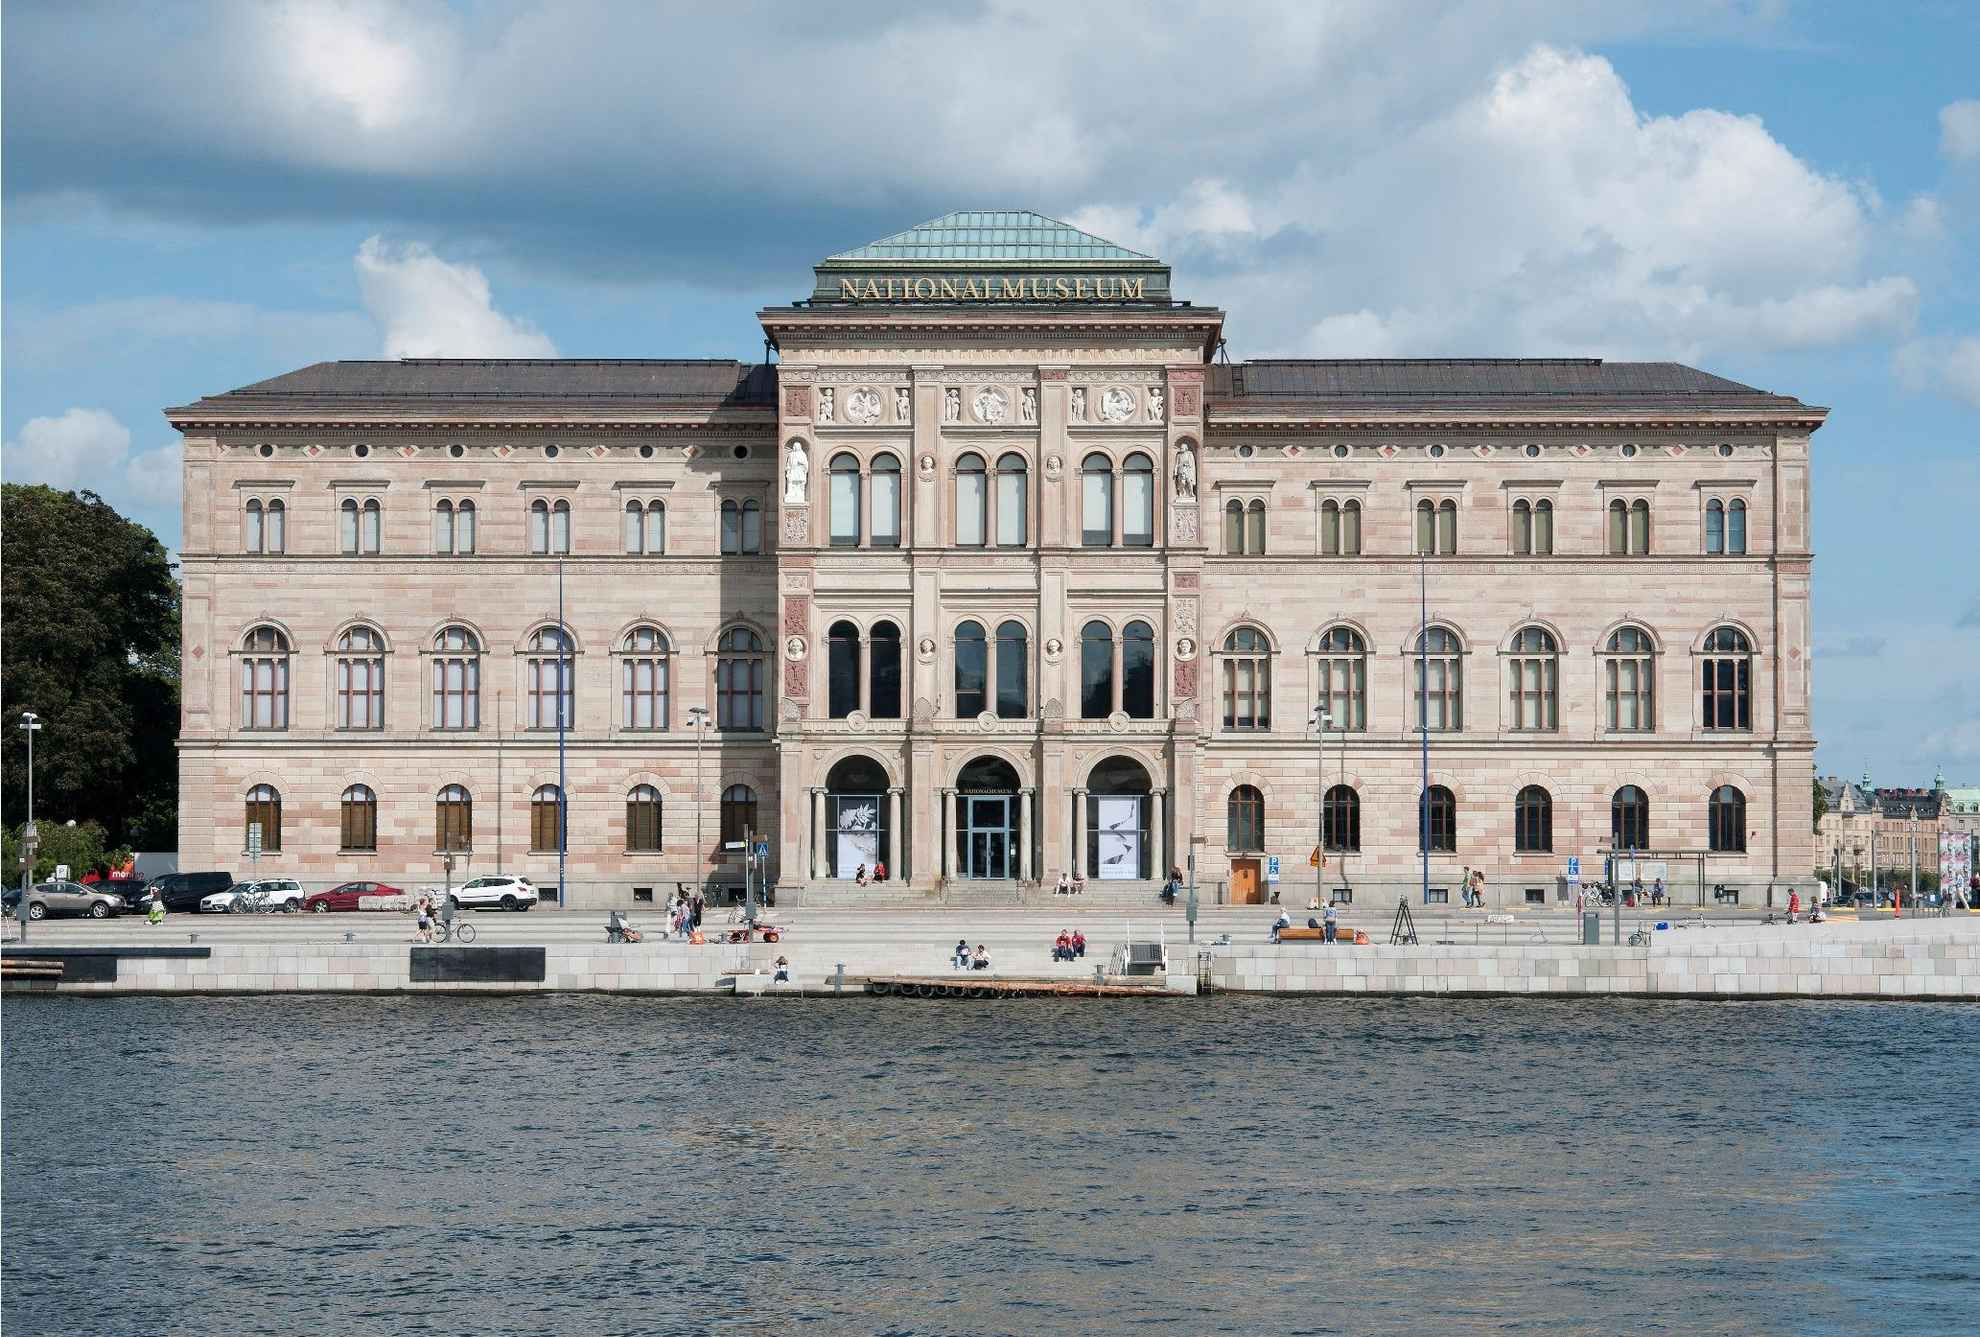 The historic building housing Nationalmuseum in Stockholm, seen from the water.